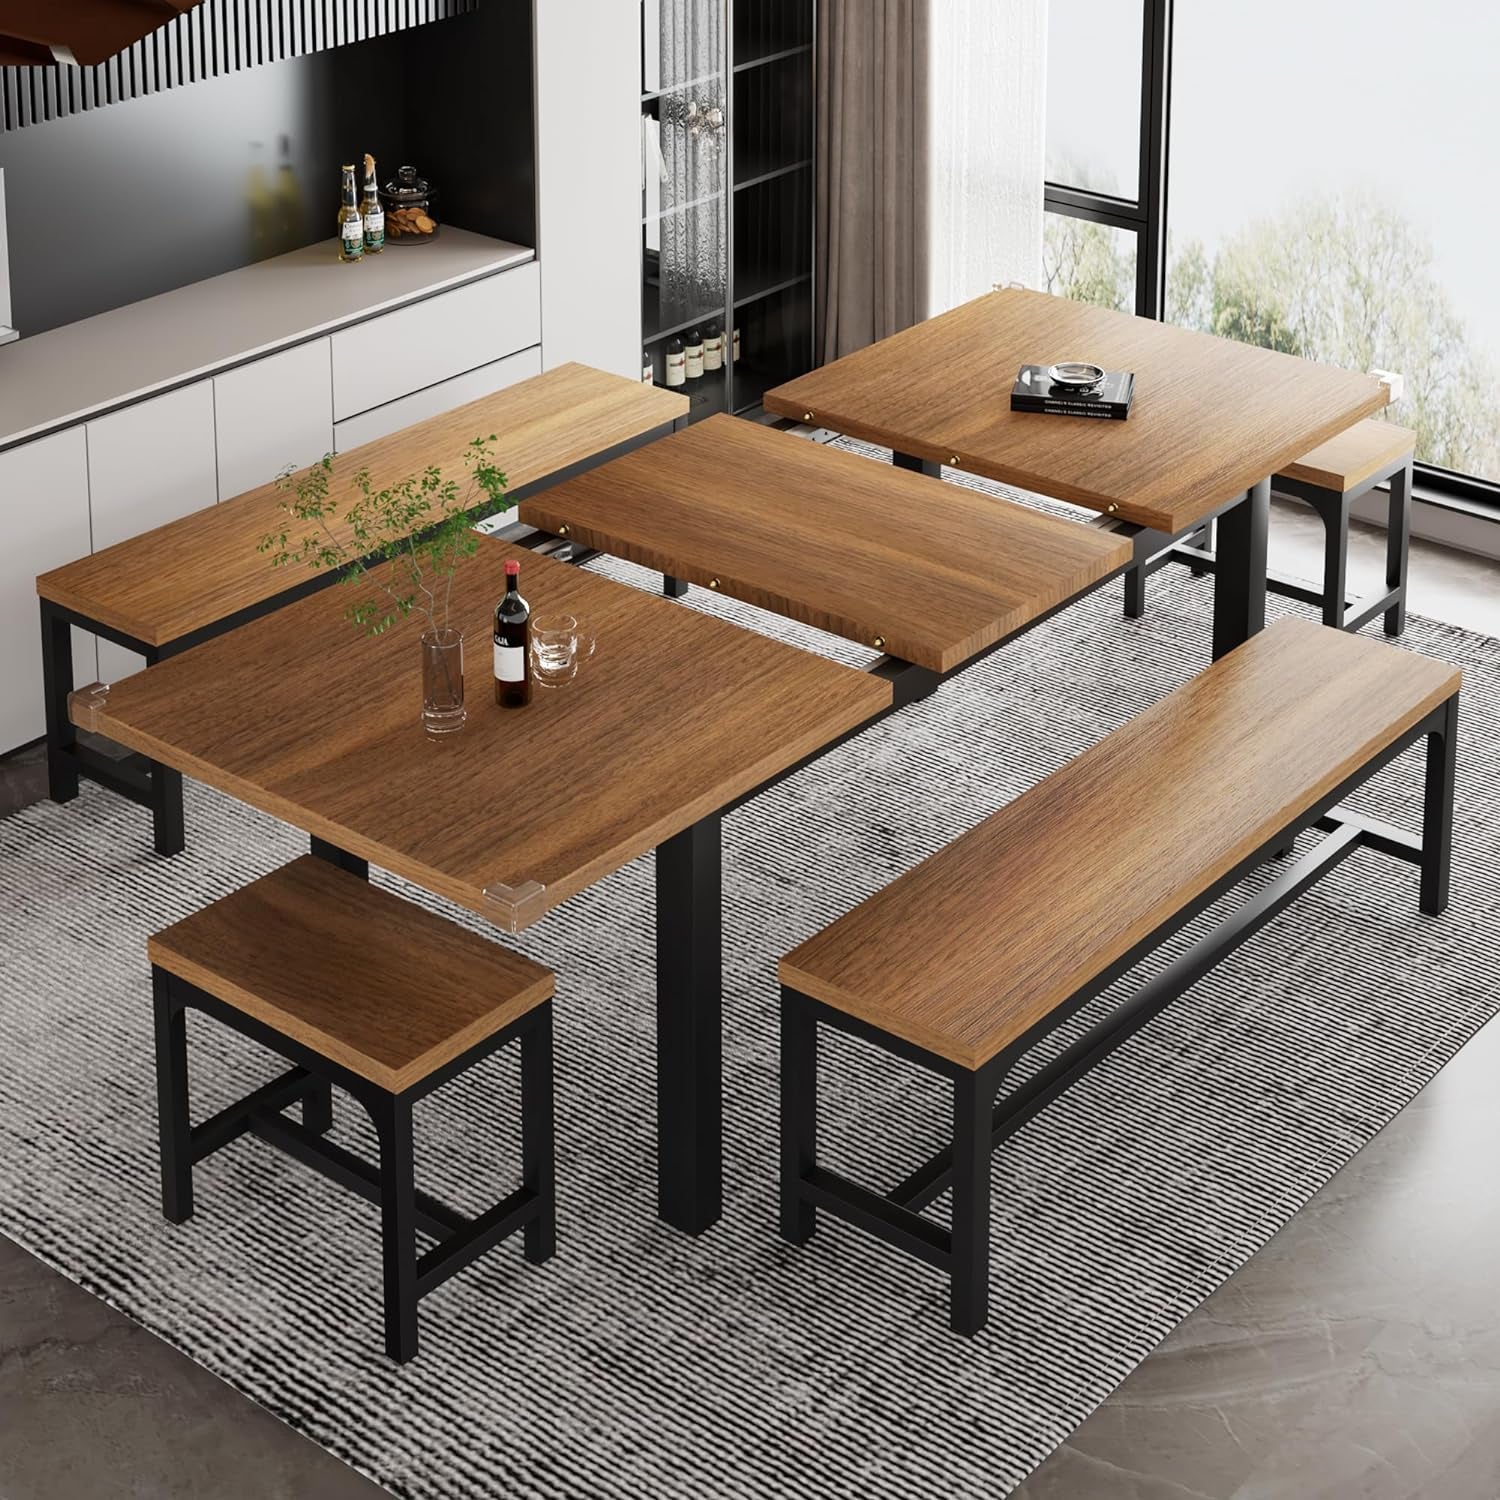 5-Piece Dining Table Set for 4-8 People, Extendable Kitchen Table Set with 2 Benches and 2 Square Stools, Mid-Century Dining Room Table with Metal Frame & MDF Board, Saving Space, Walnut